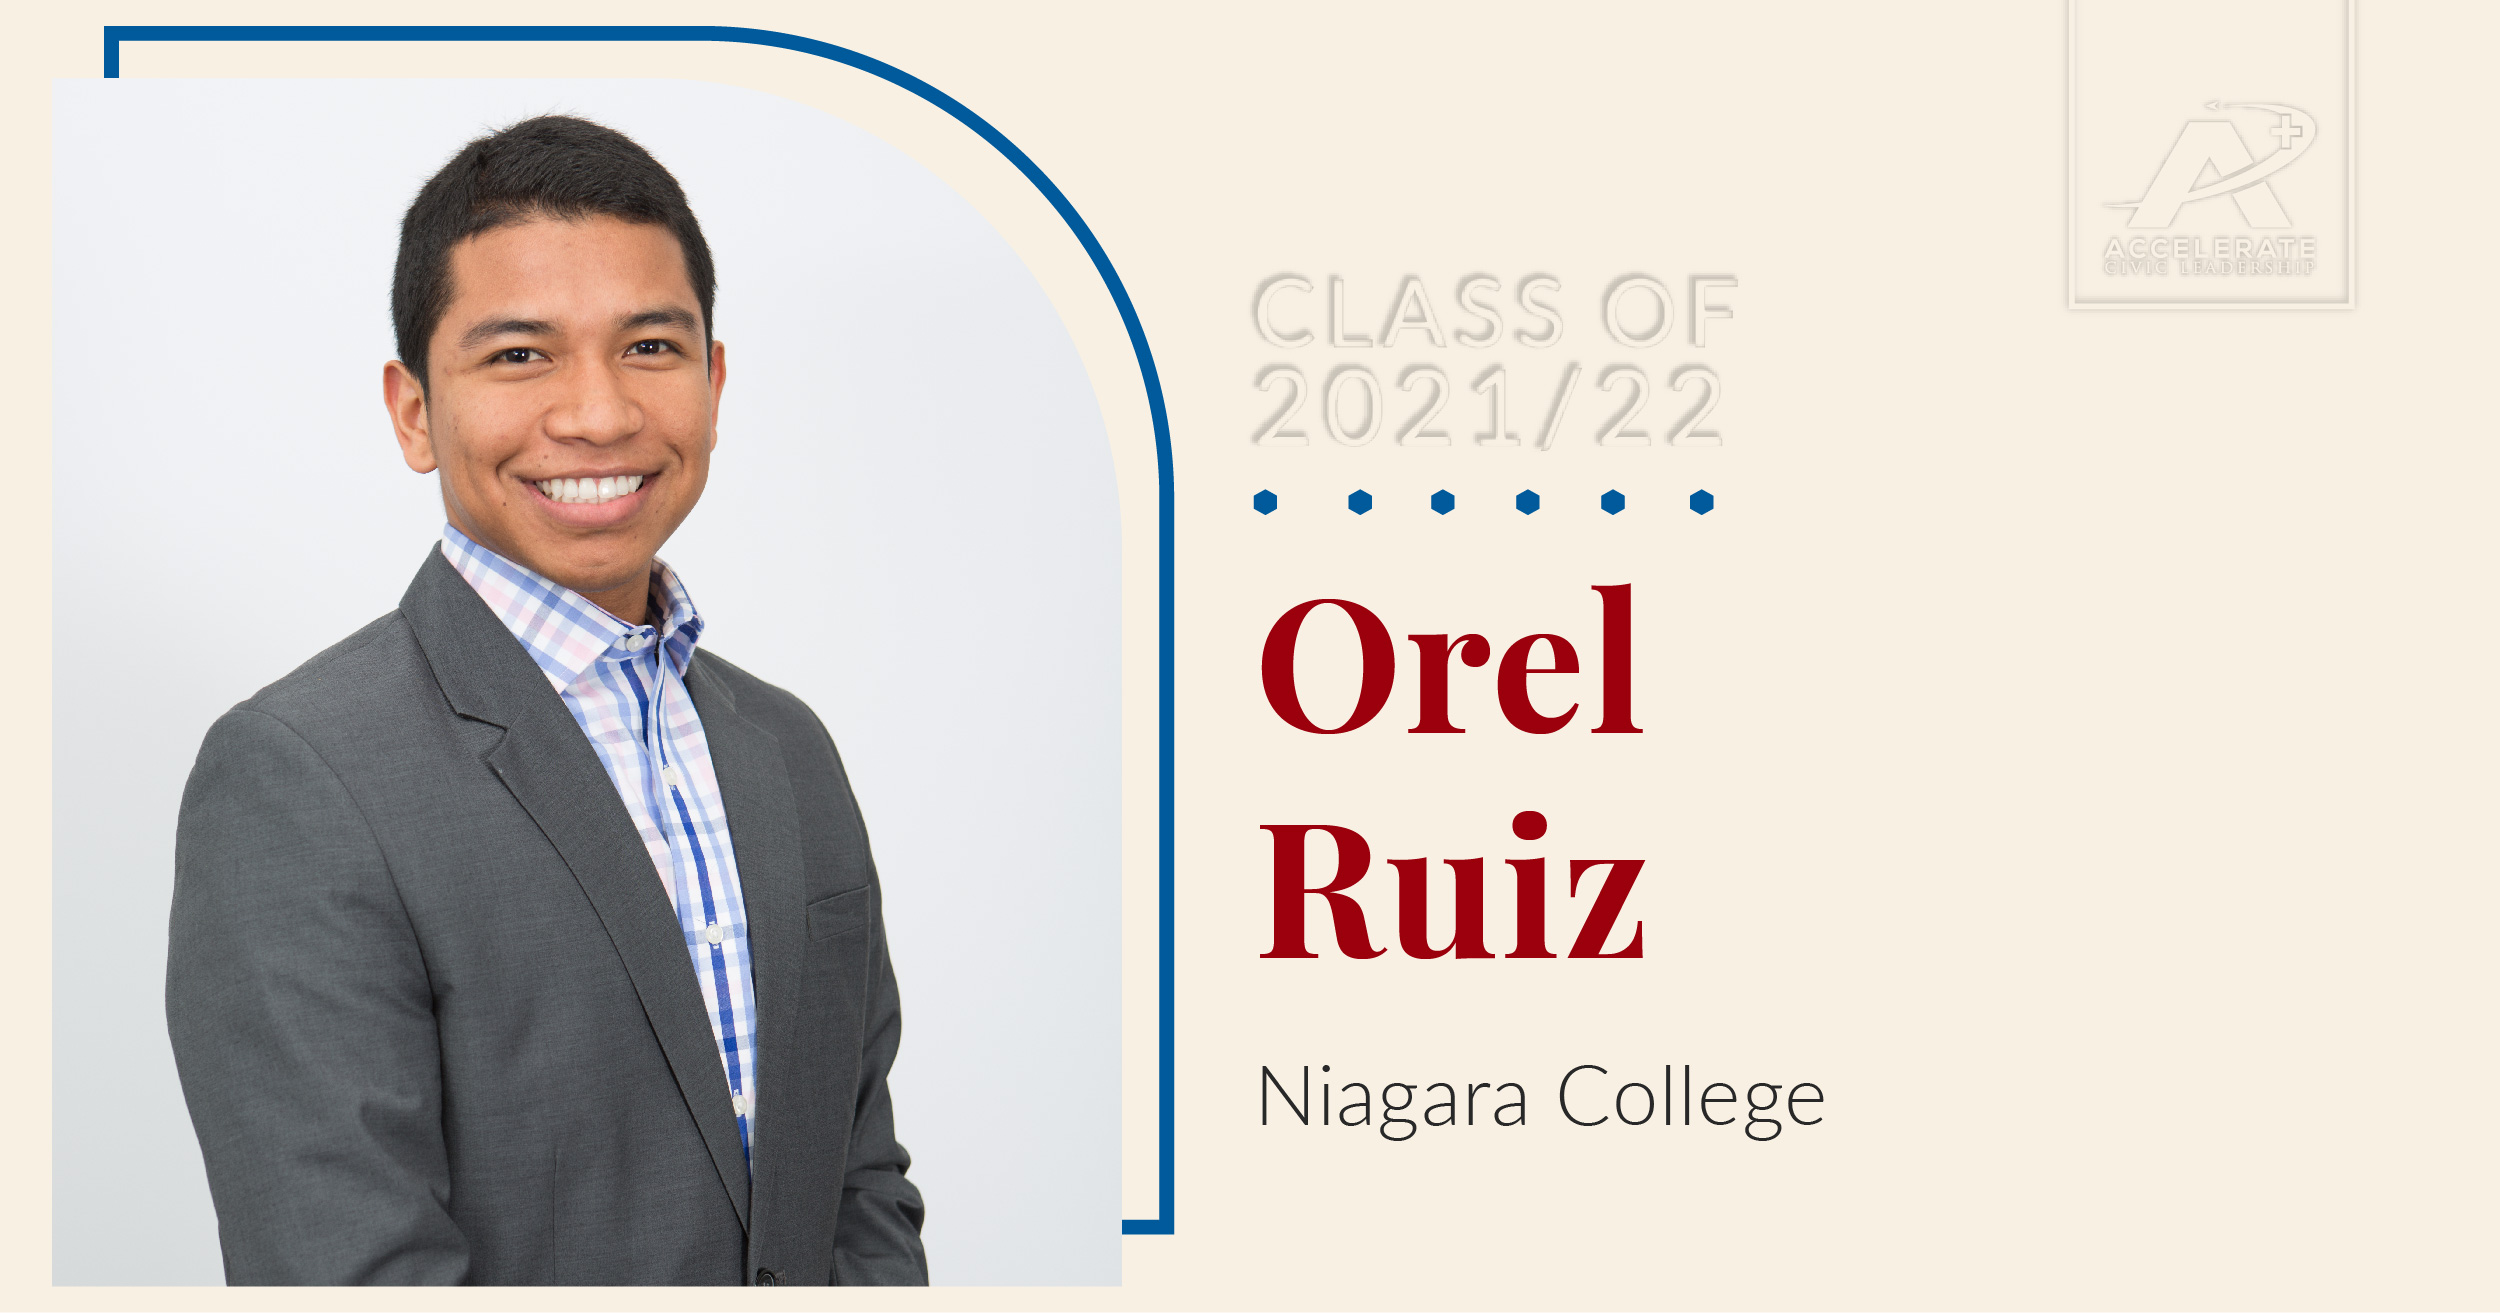 Leader spotlight for Orel Ruiz, Manager of Global Education & Training within Niagara College’s International Division.